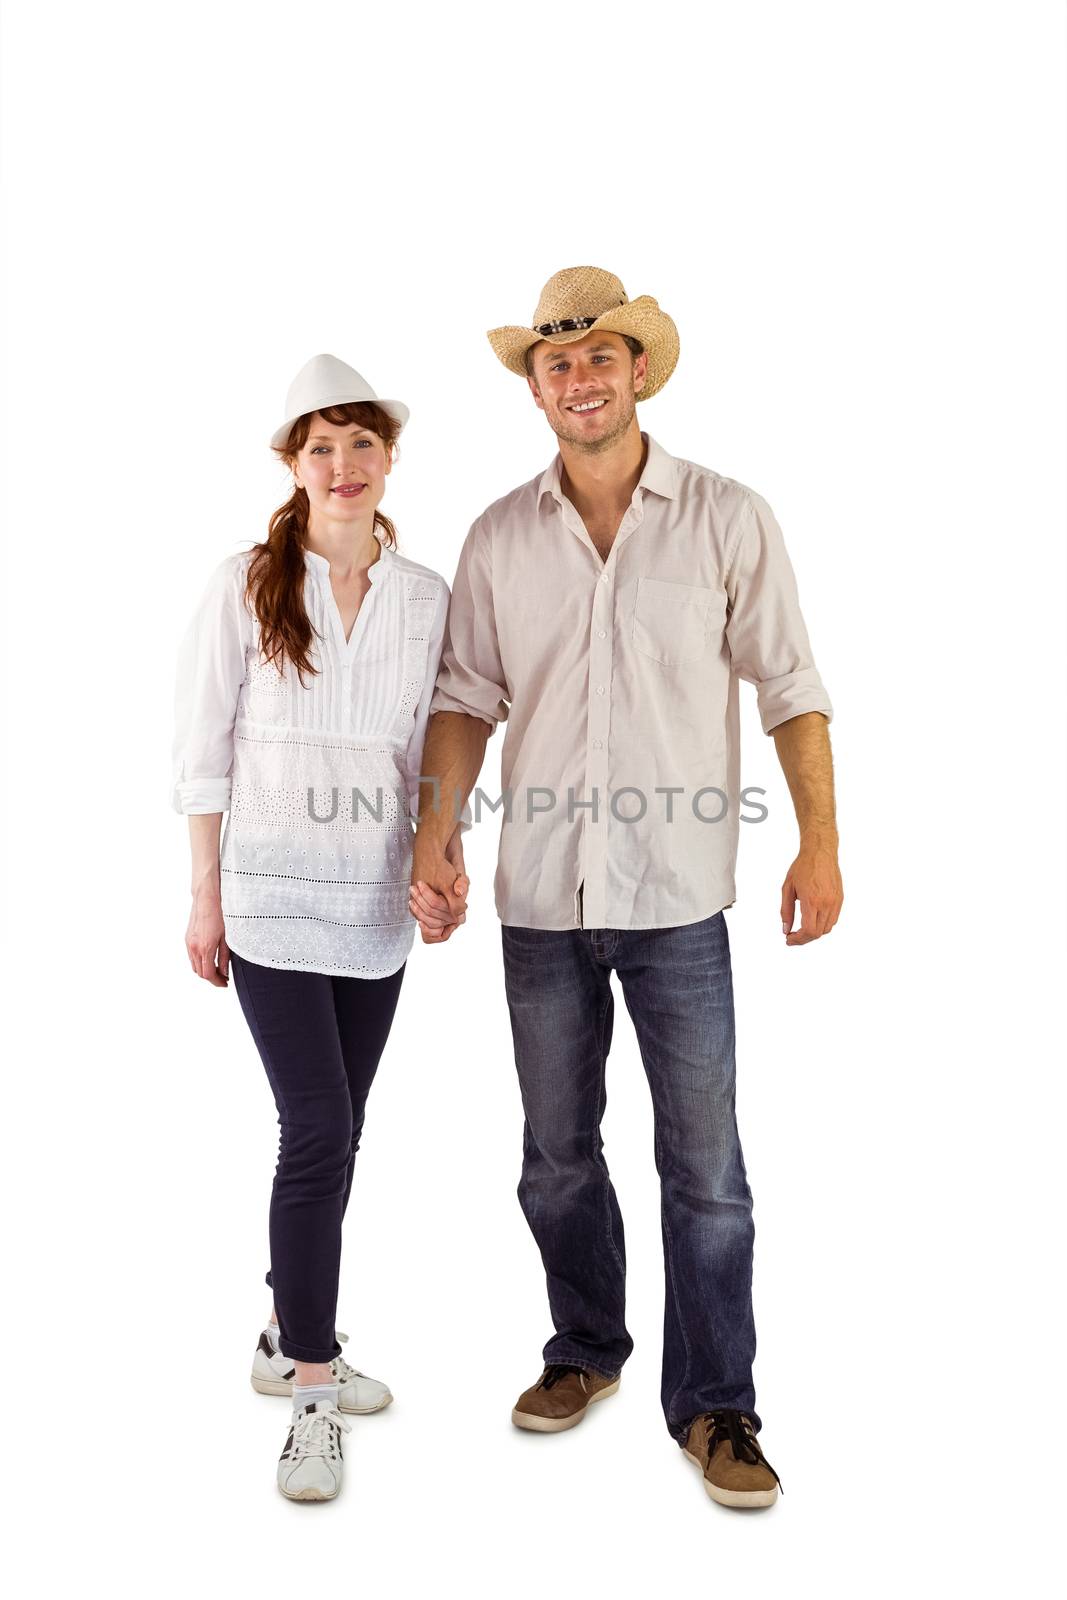 Smiling couple both wearing hats by Wavebreakmedia